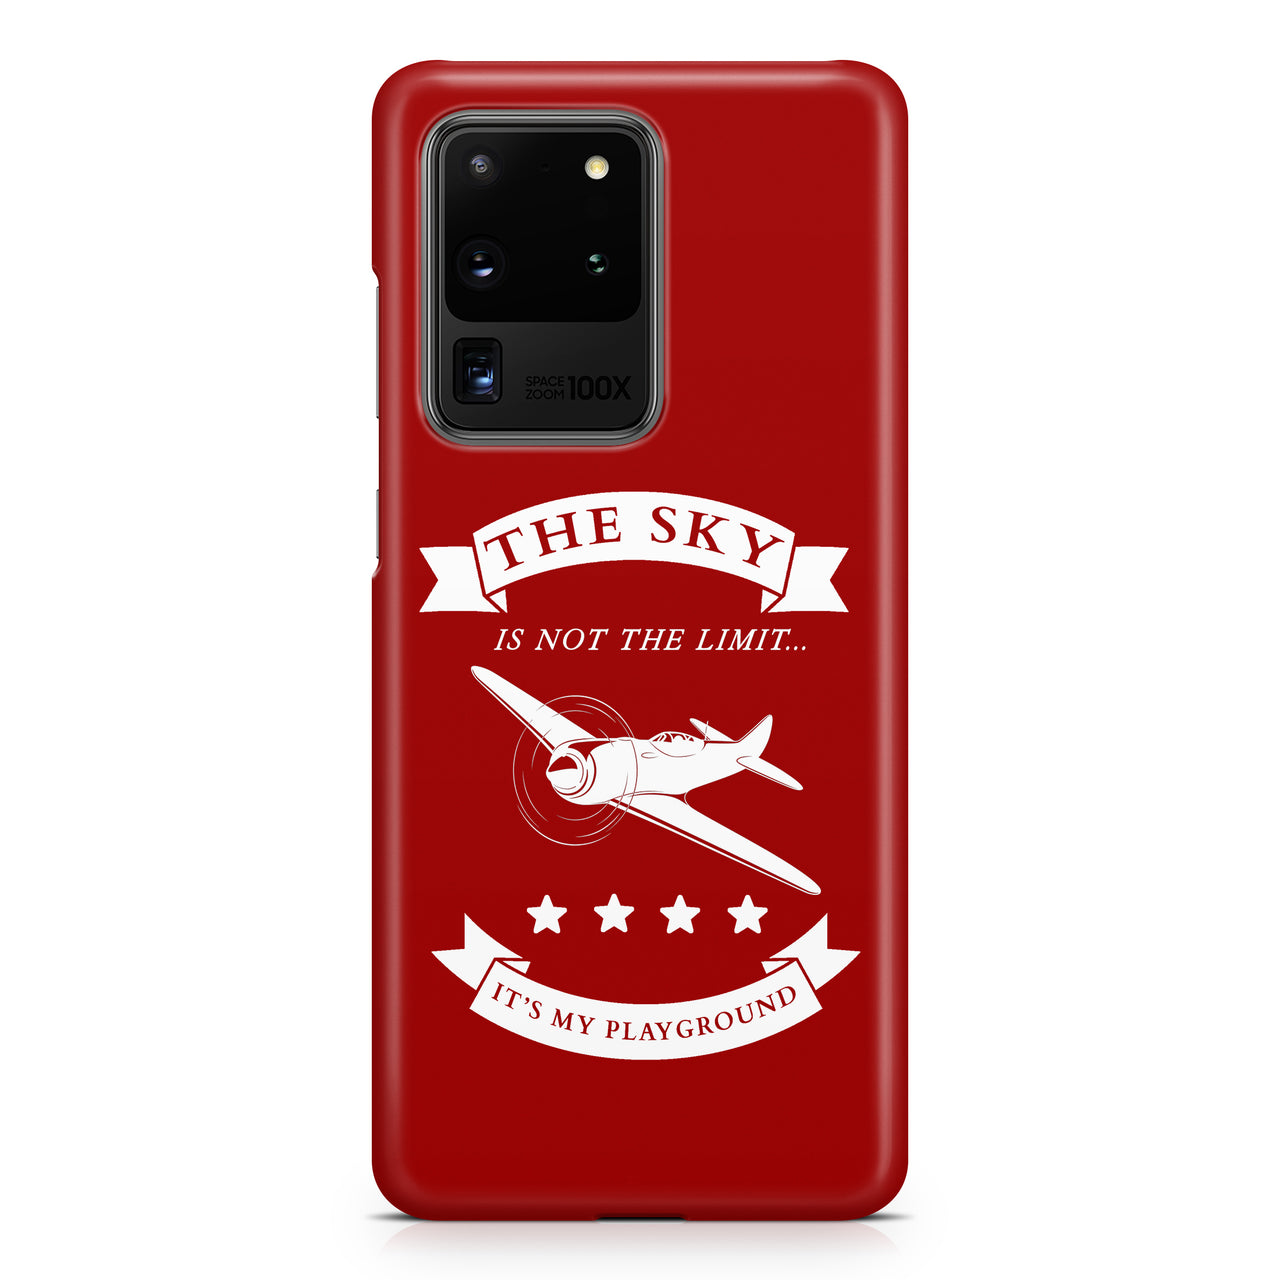 The Sky is not the limit, It's my playground Samsung A Cases